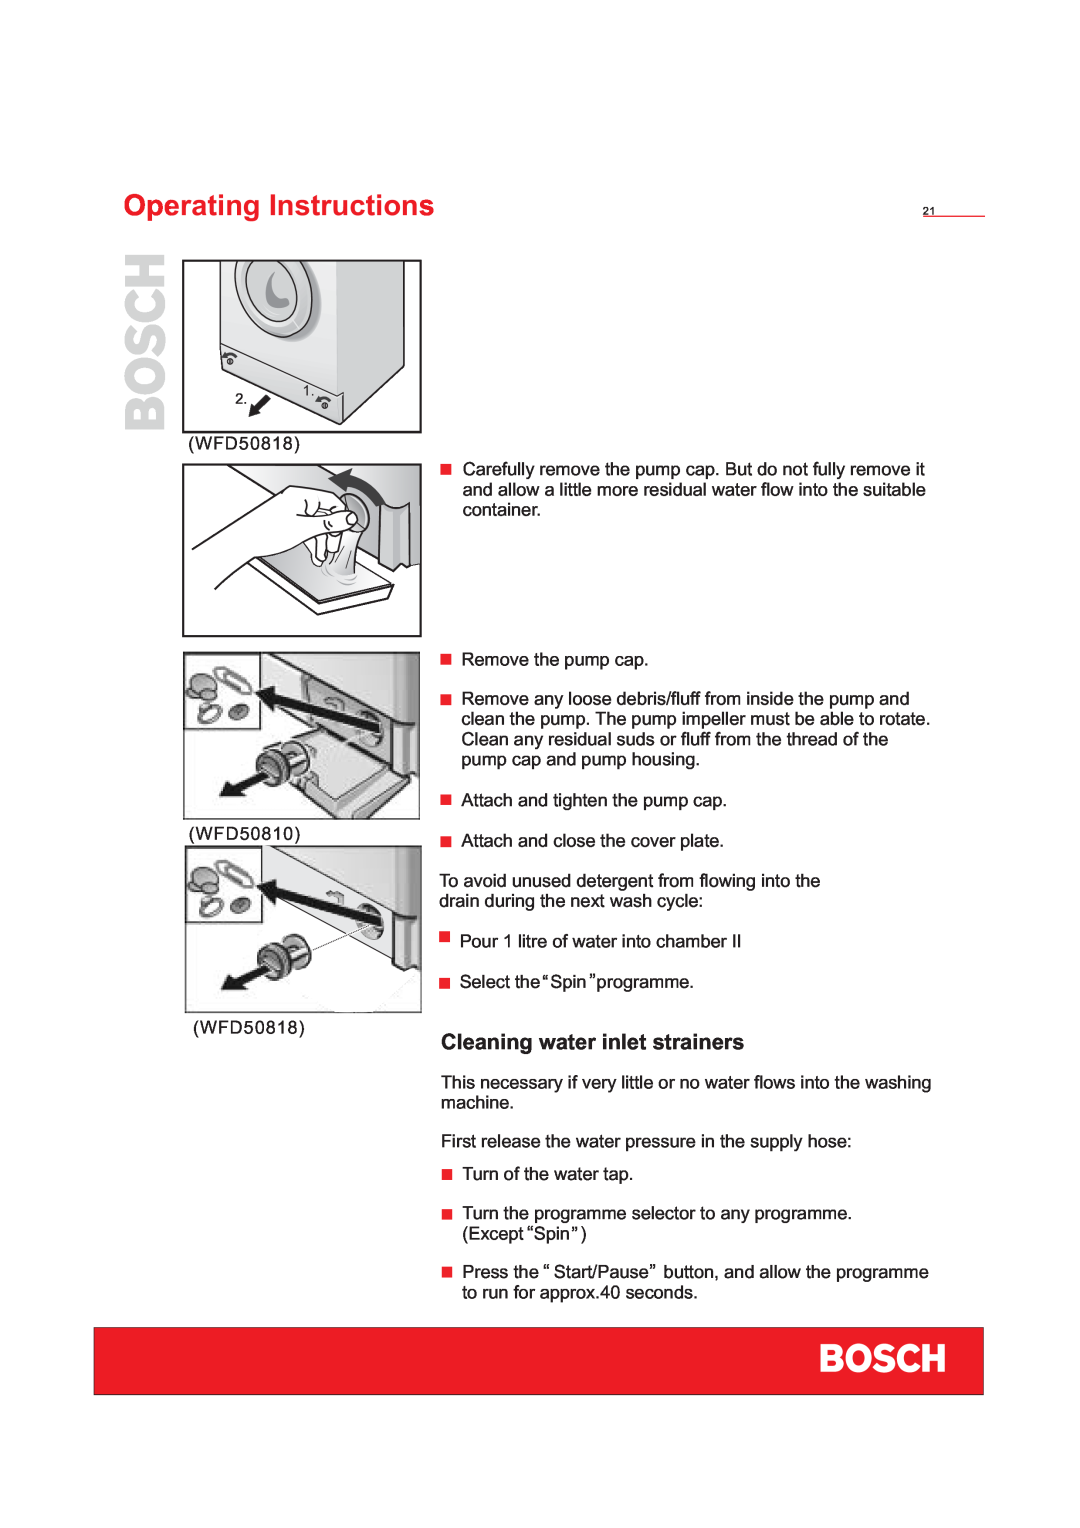 Bosch Appliances WFD50818 installation instructions Cleaning water inlet strainers, Operating Instructions 